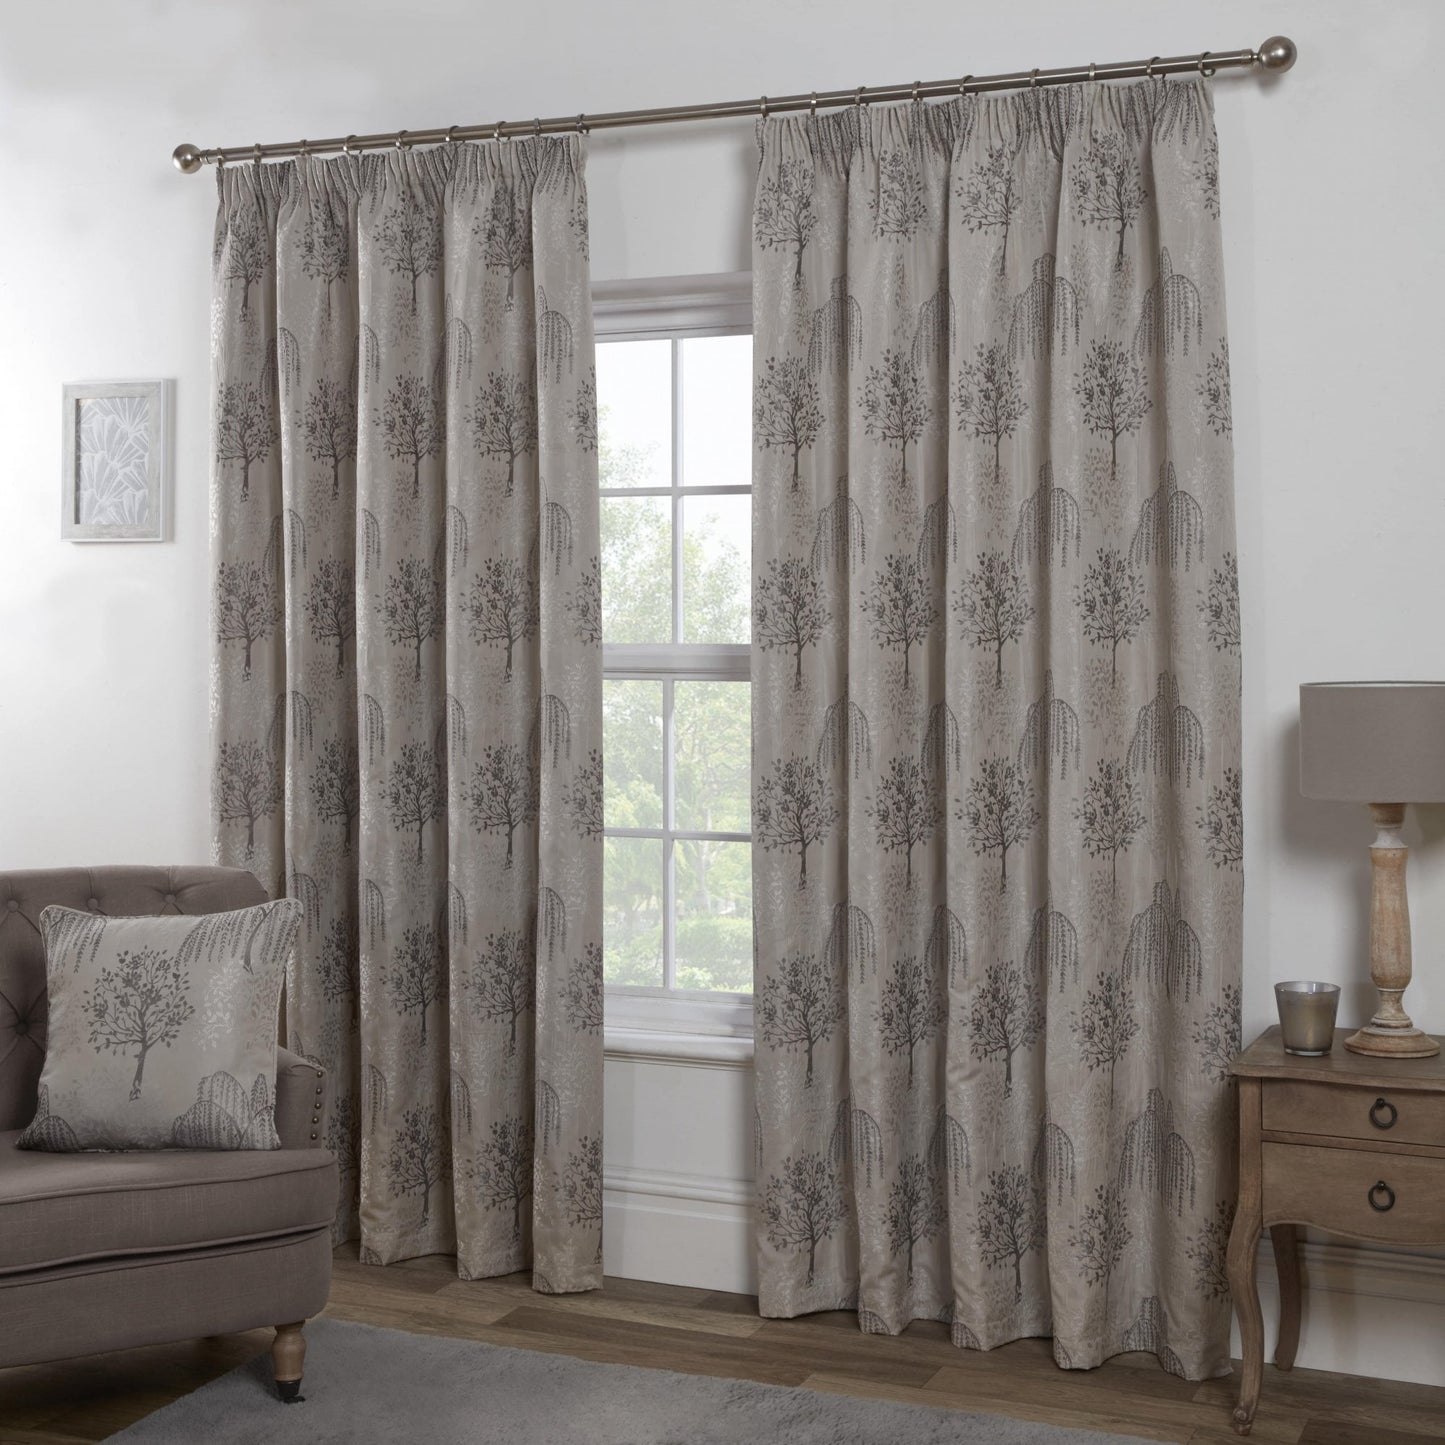 Orchard Tape Patterned Curtains - Silver